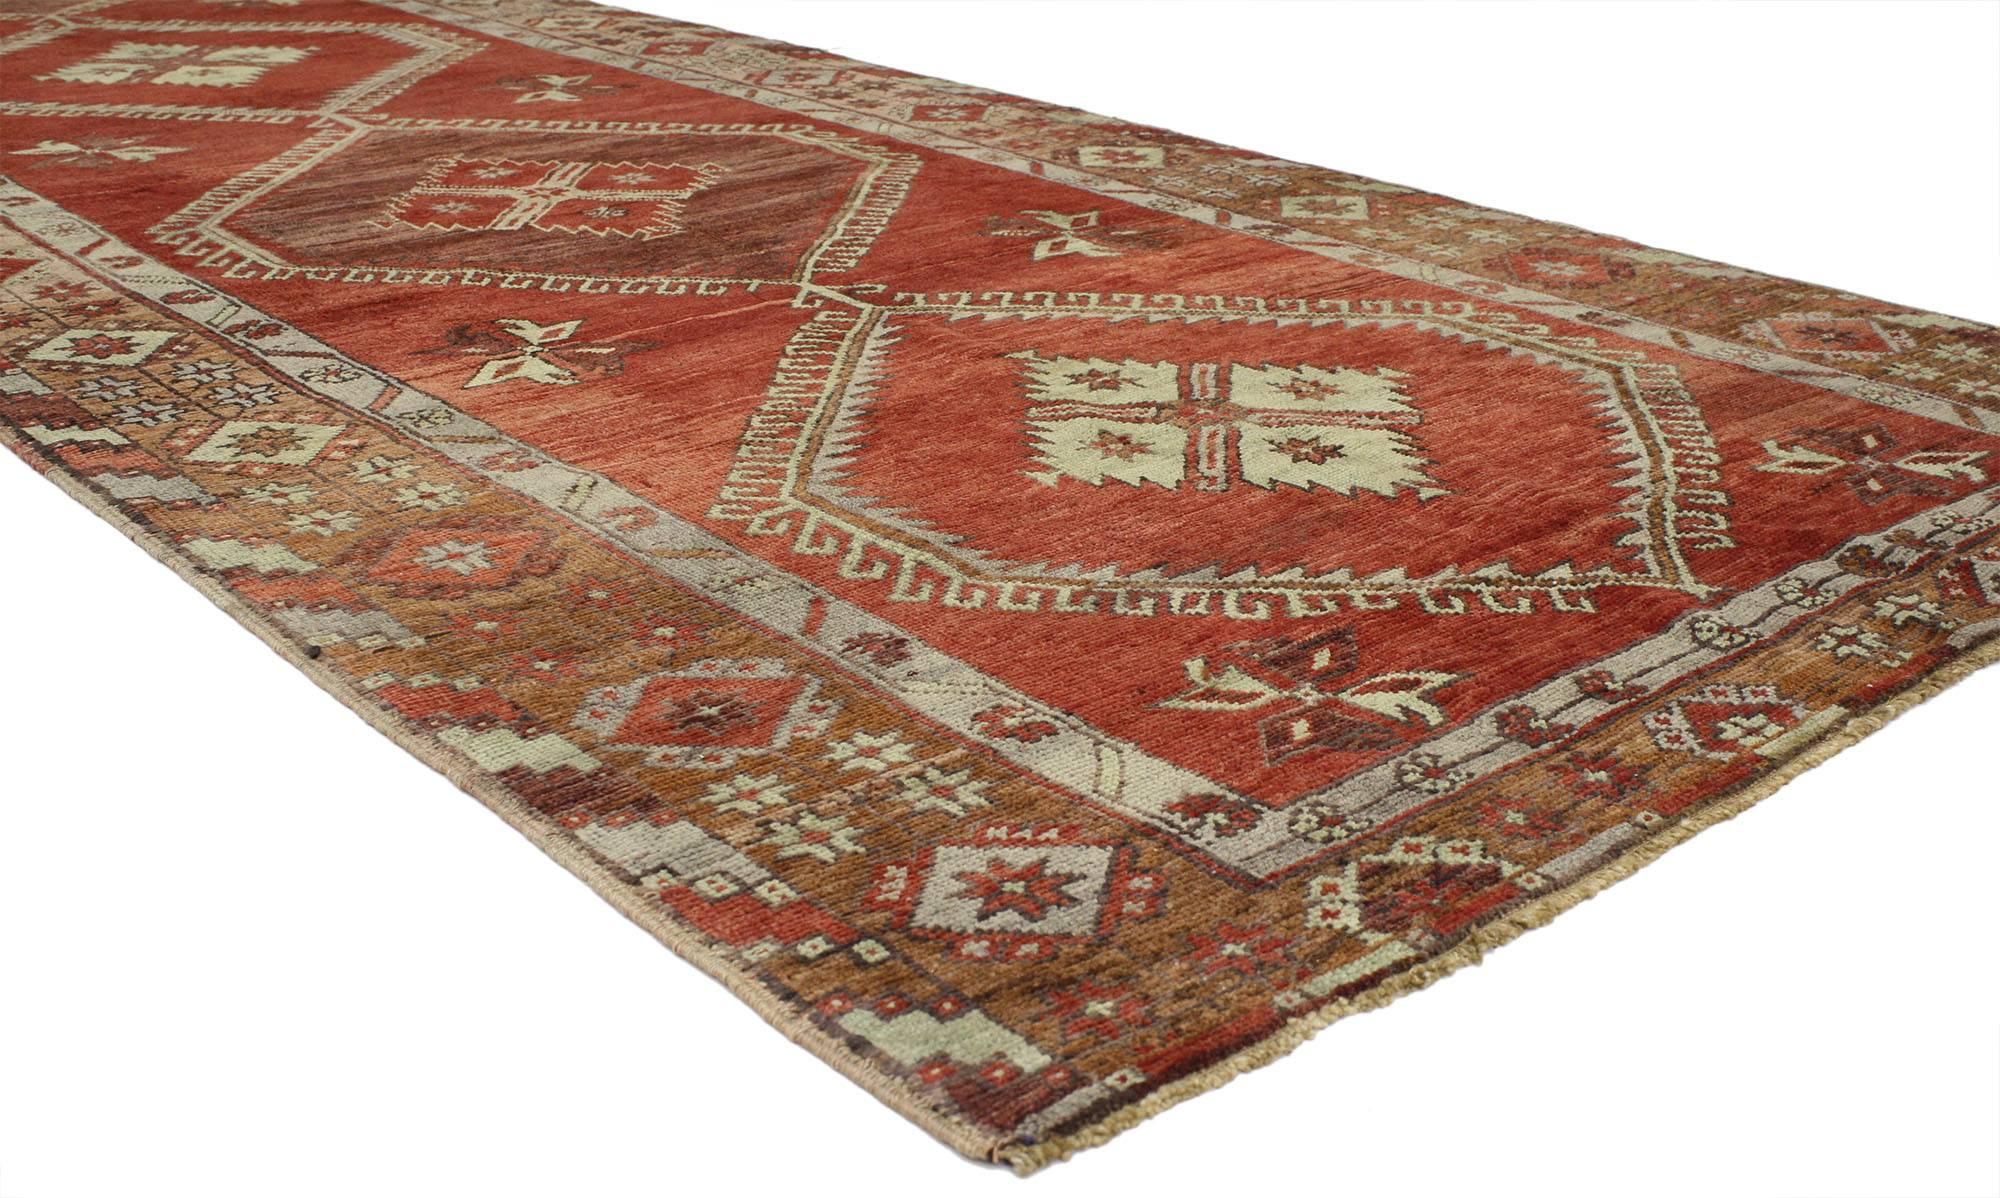 52247 Vintage Turkish Oushak Gallery Rug with Mid-Century Modern Style, Hallway Runner 05'02 x 15'00. This hand-knotted wool vintage Turkish Oushak runner features a geometric pattern with four stacked hexagonal medallions with tarantula style edges